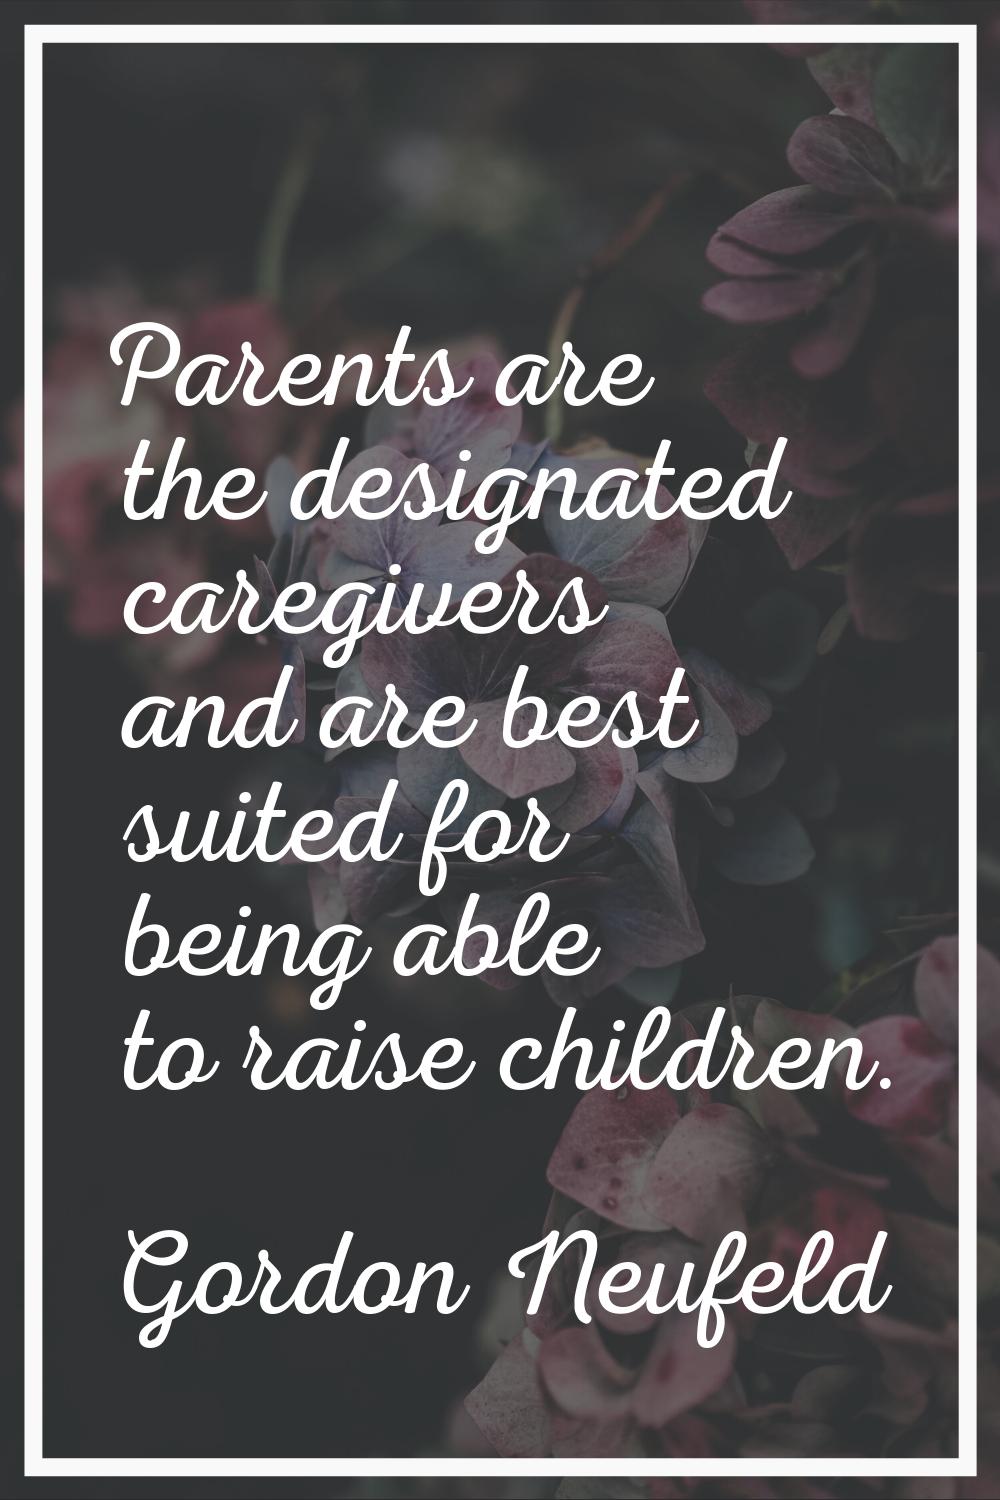 Parents are the designated caregivers and are best suited for being able to raise children.